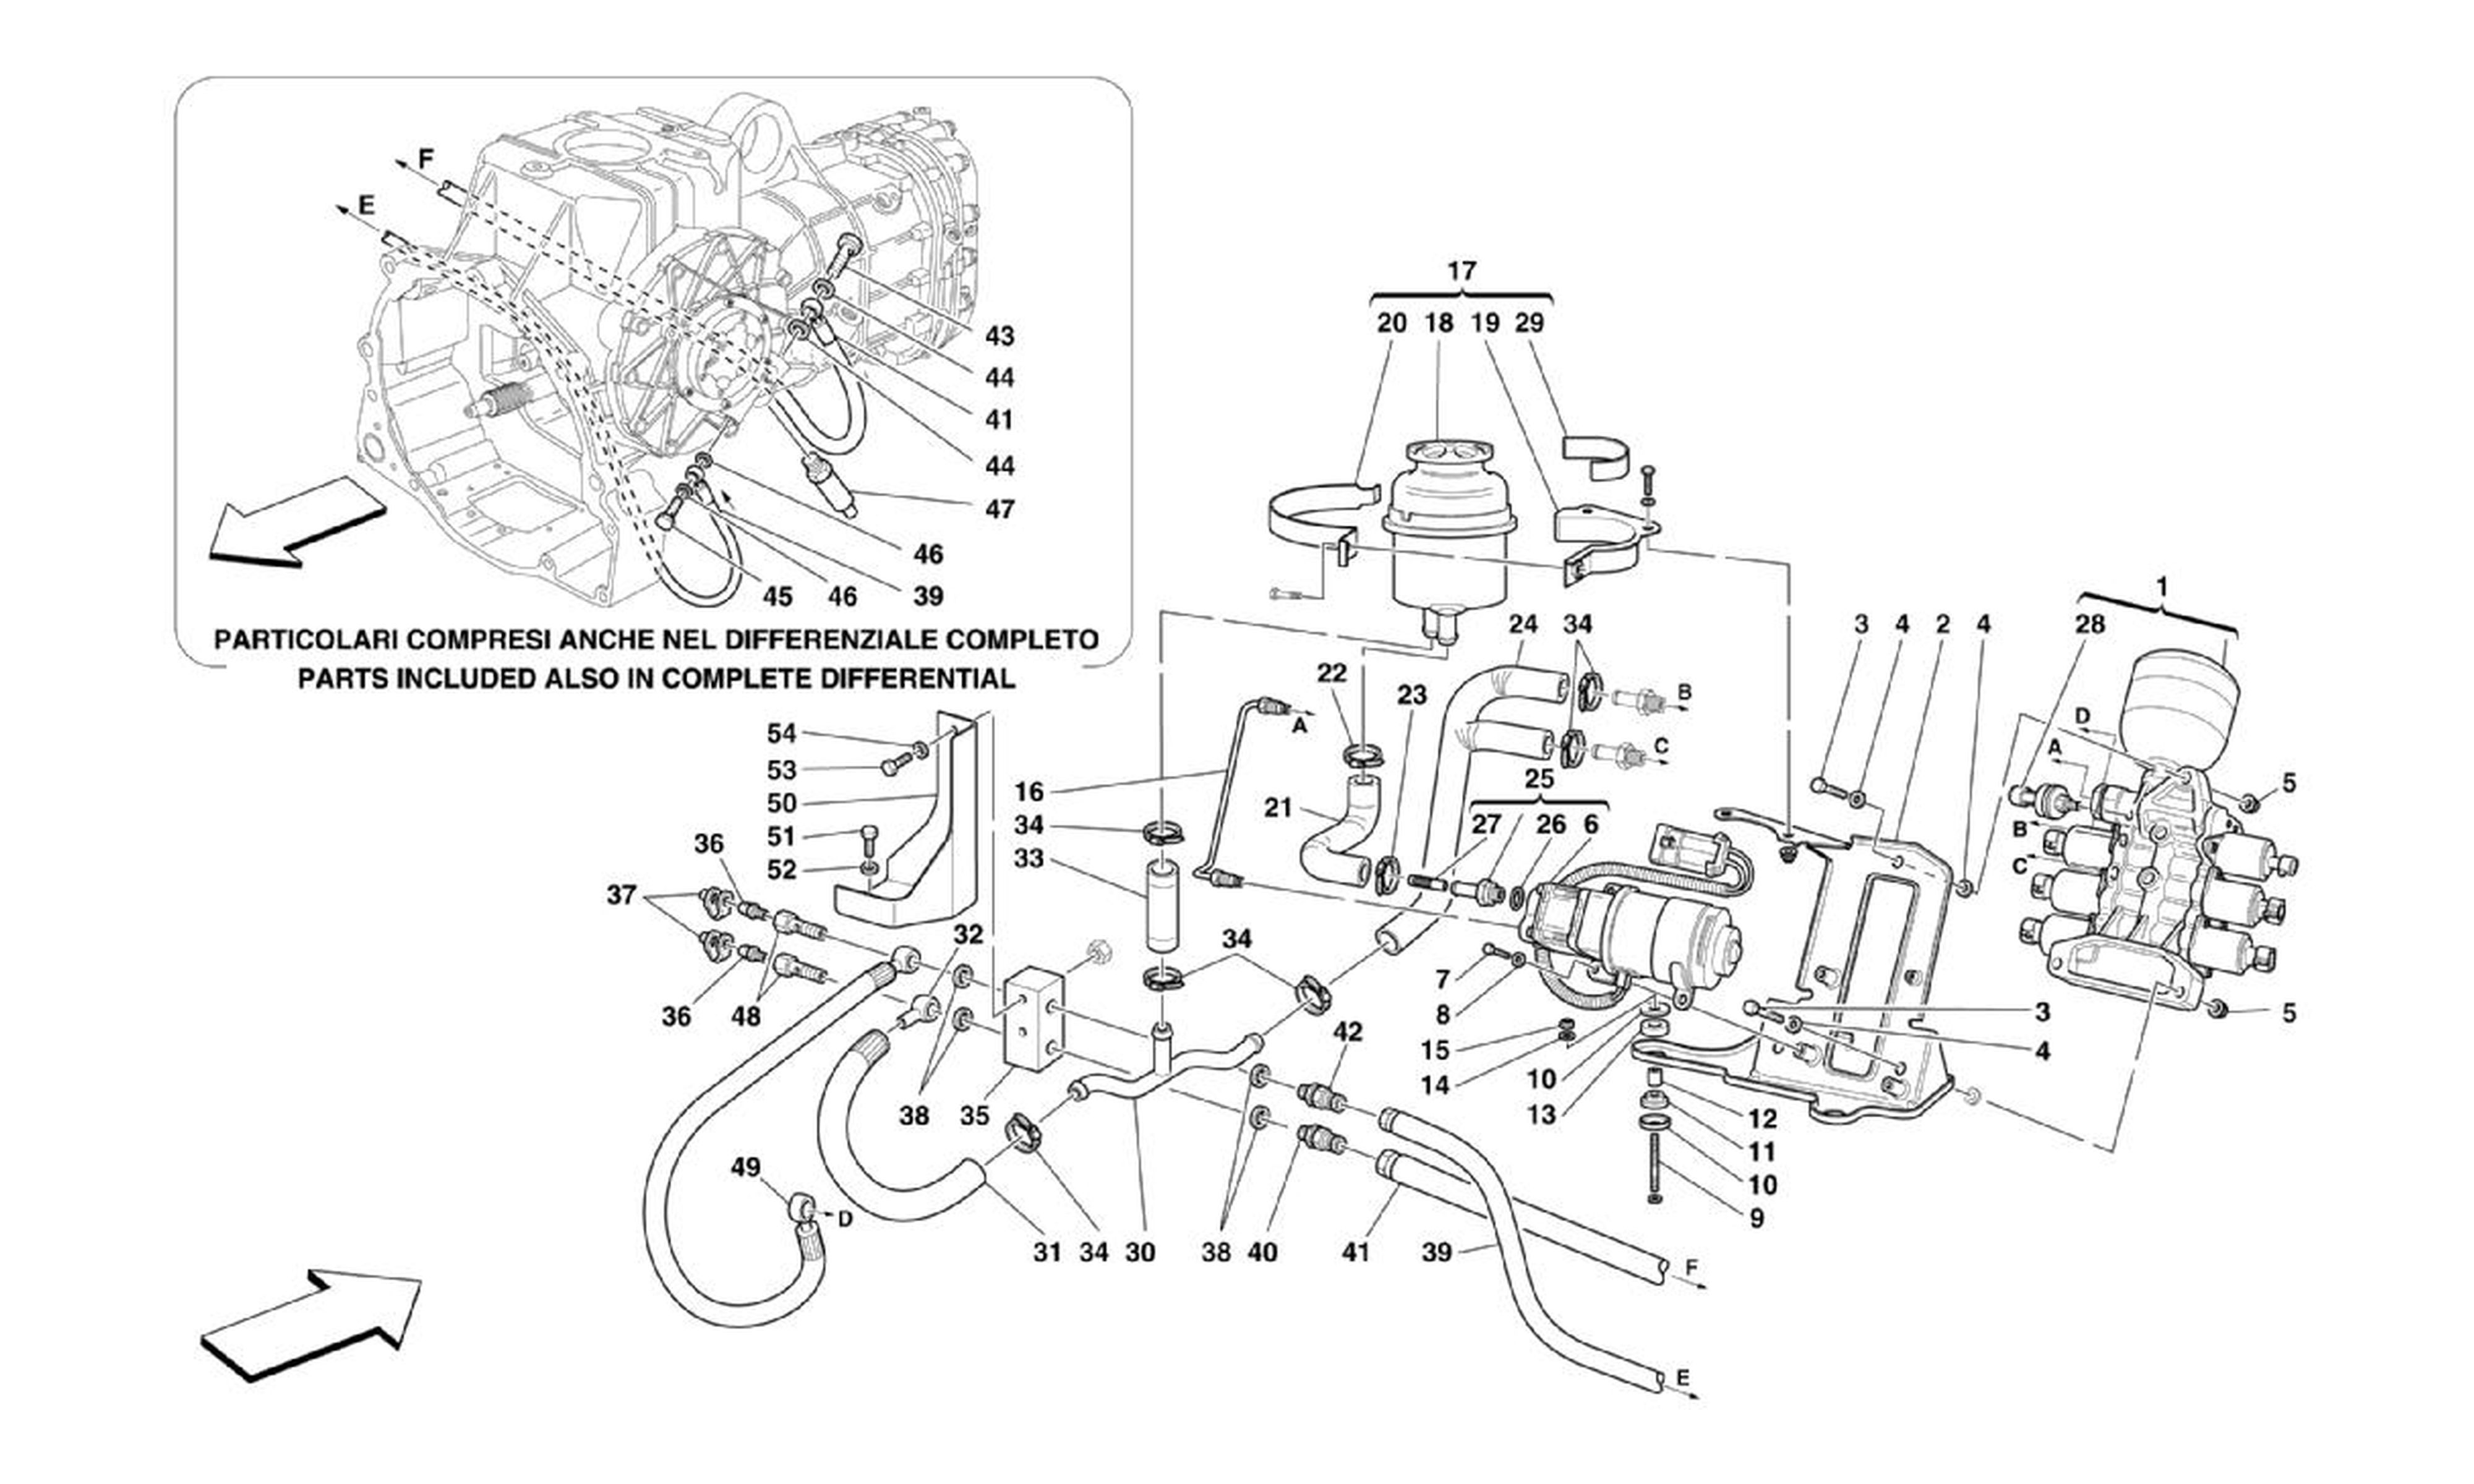 Schematic: F1 Gearbox And Clutch Hydraulic Control -Applicable For F1-